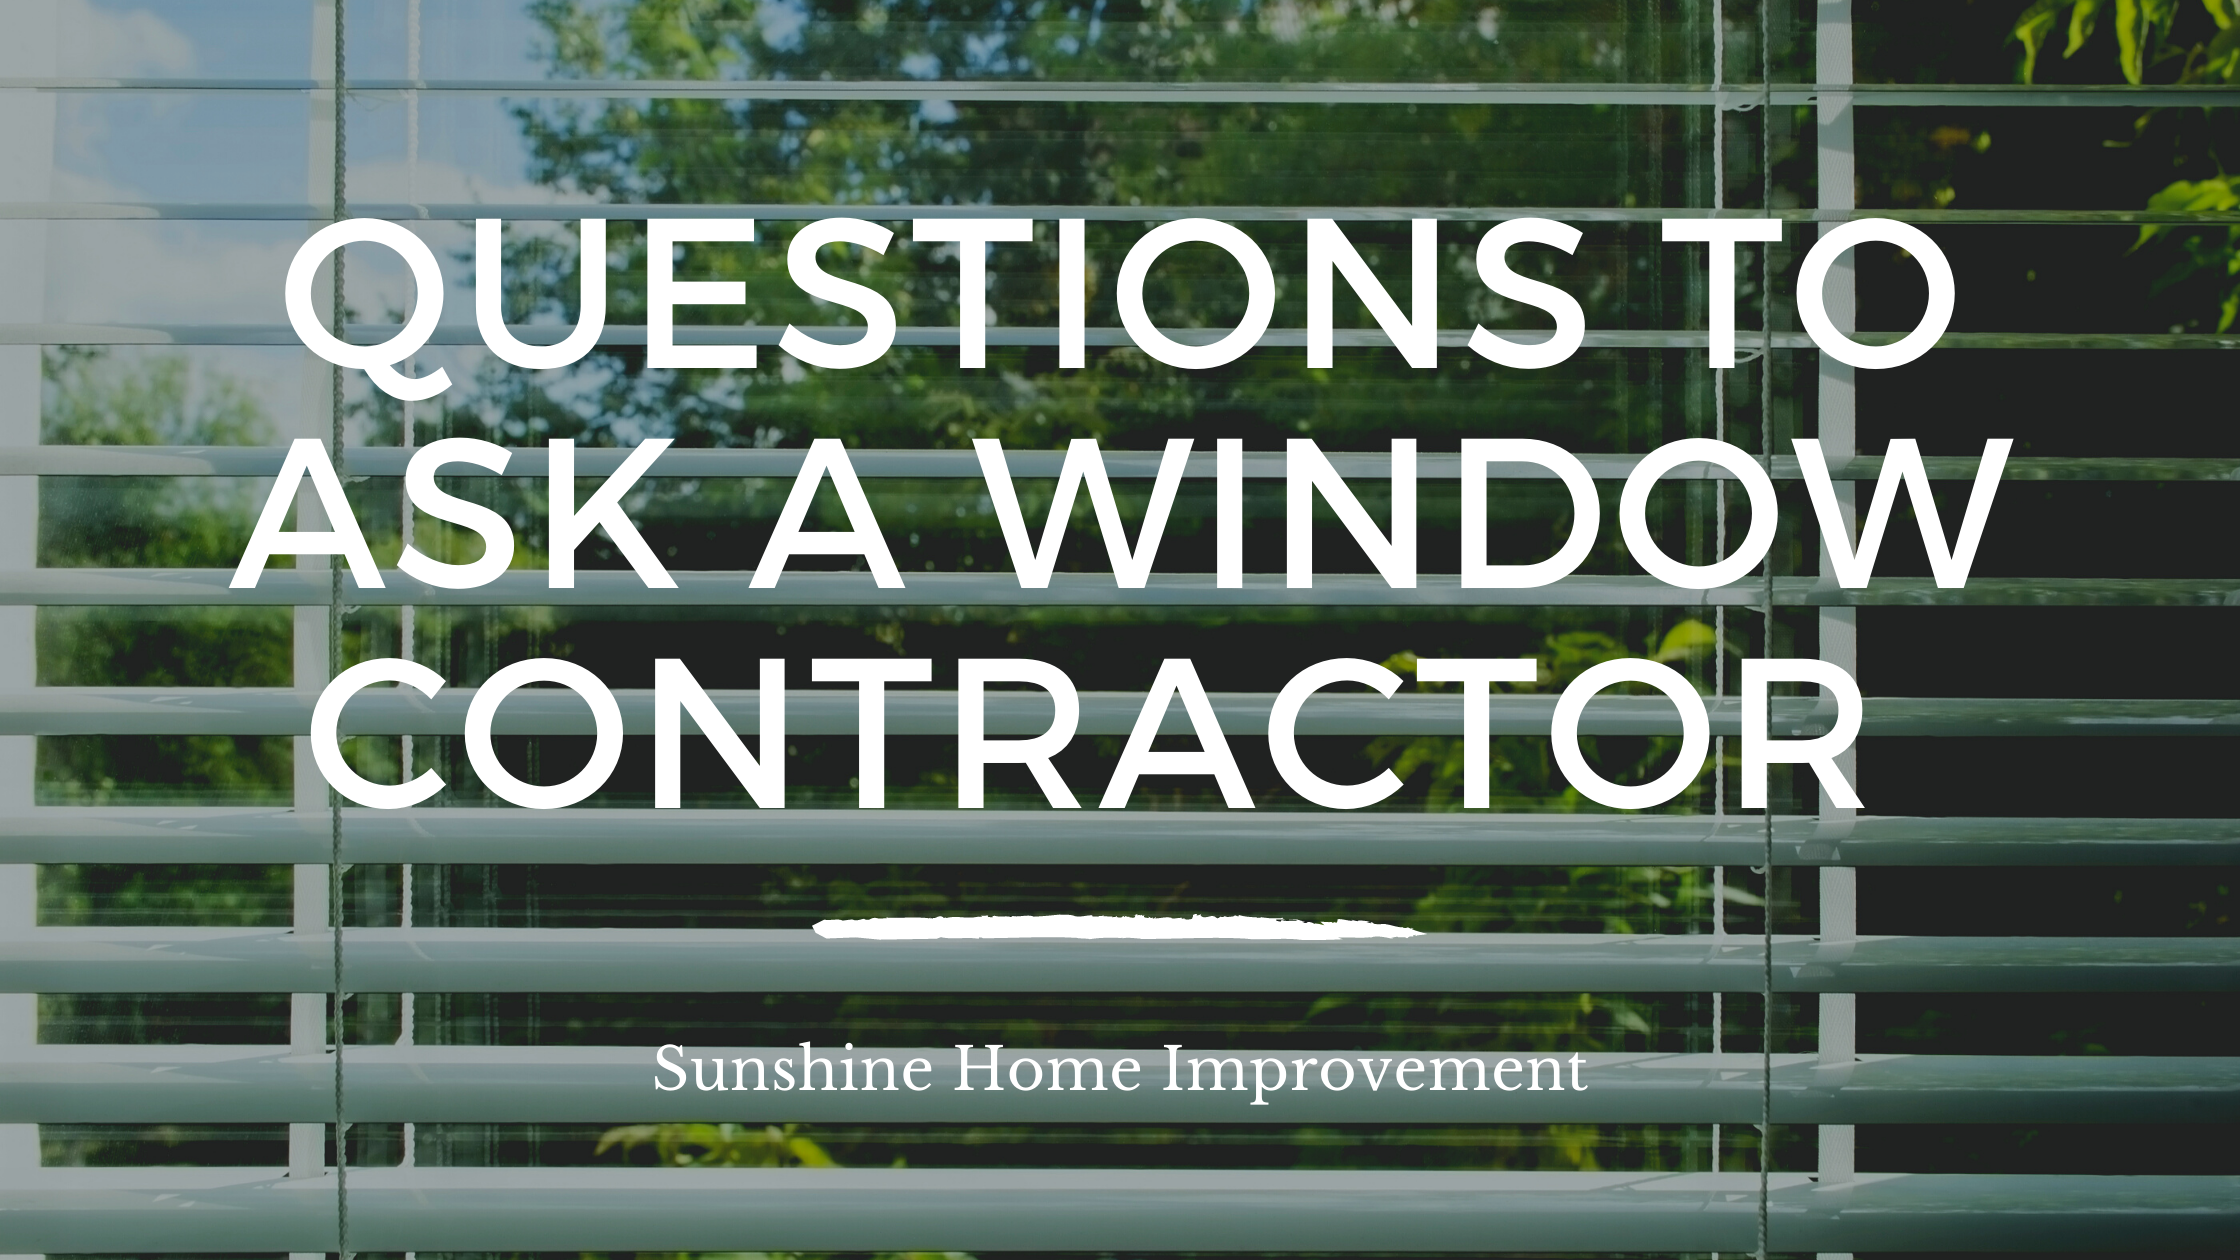 Window Replacement Company in Kansas City | Window Replacement in Kansas City